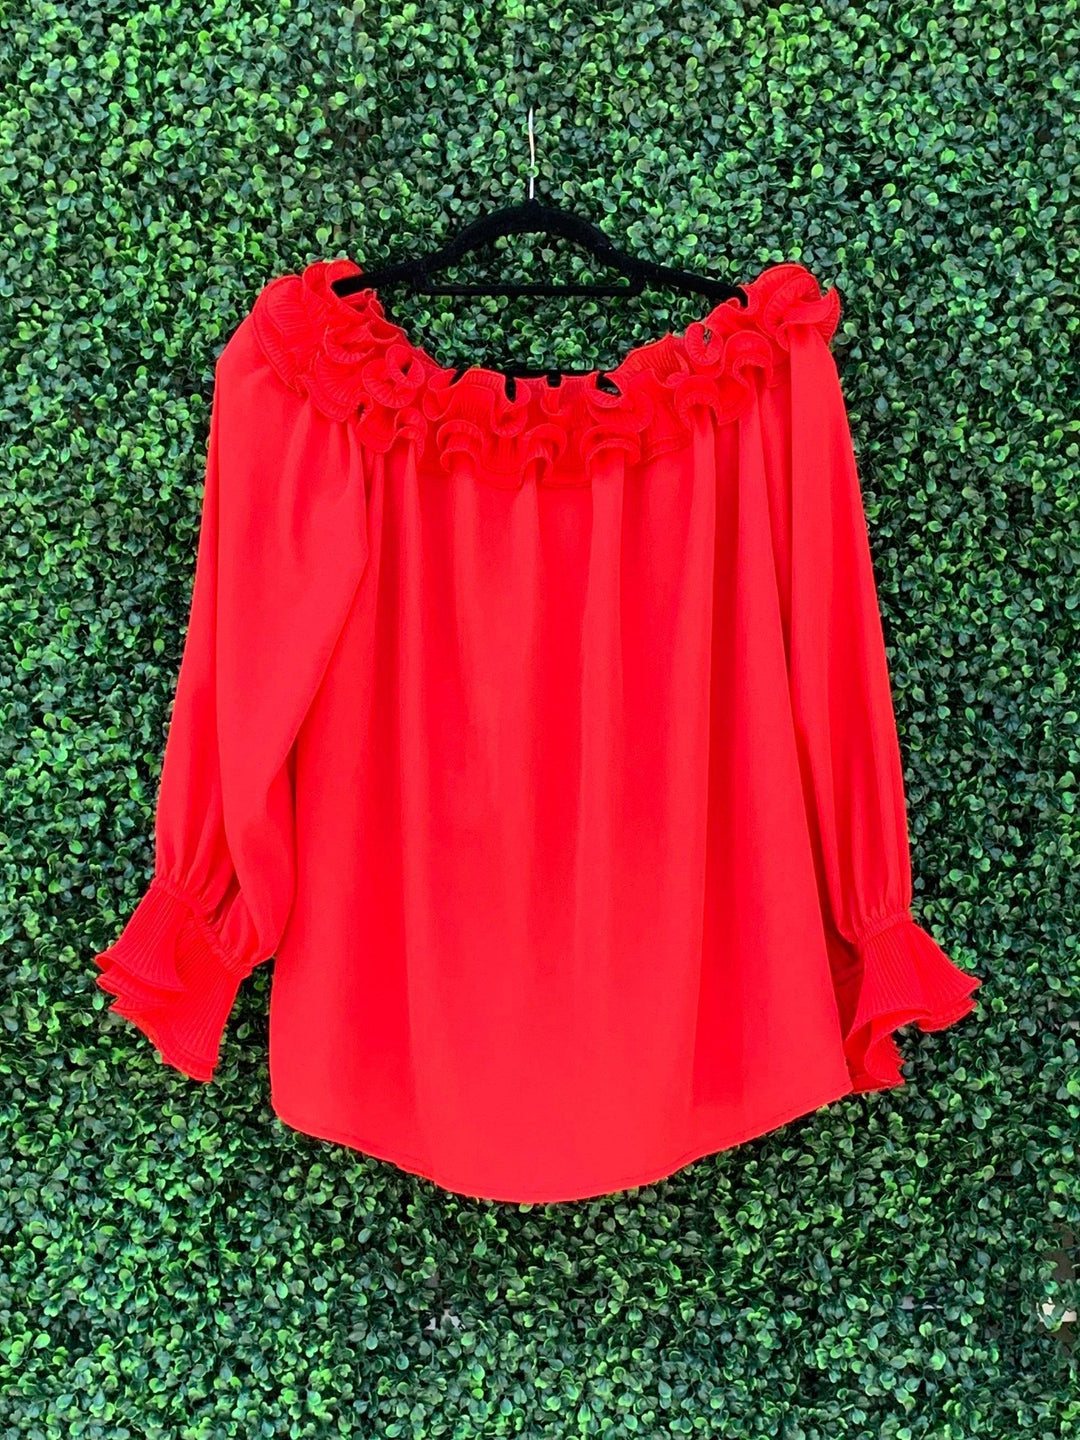 red ruffle top 30% off 